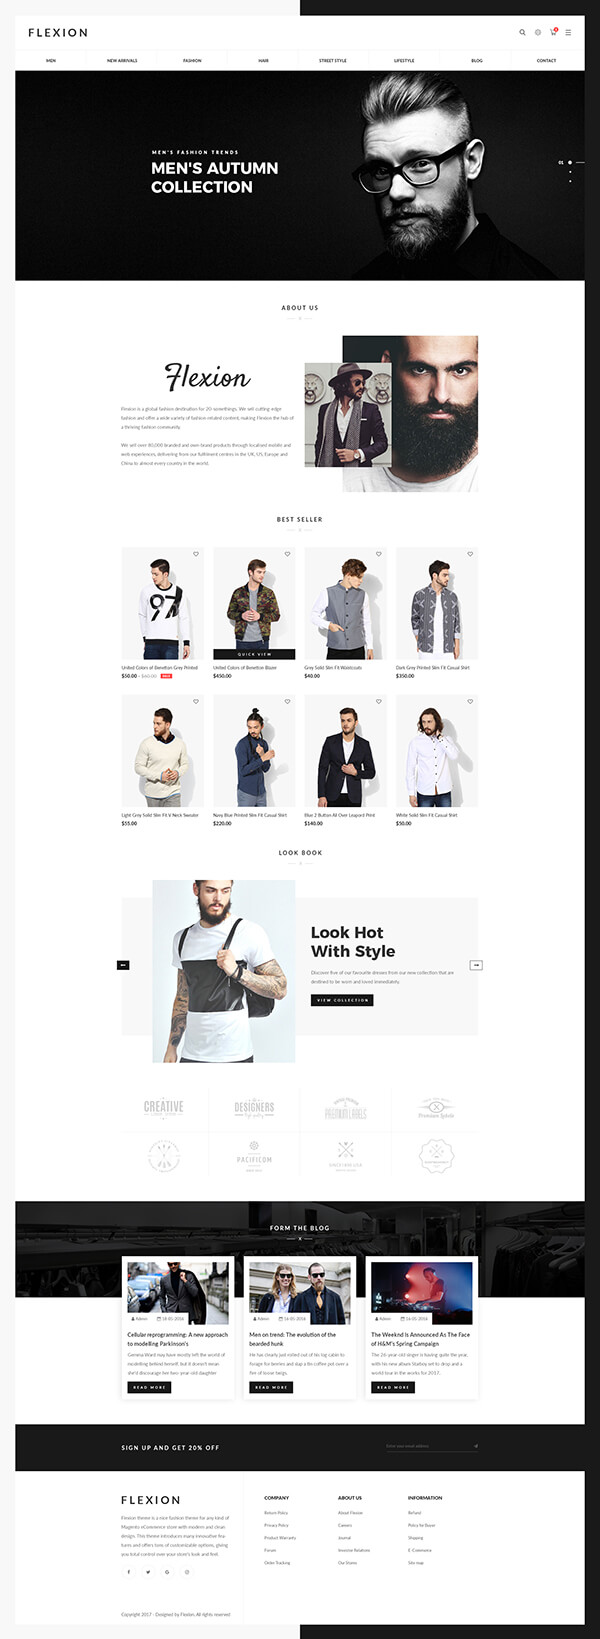 Flexion - Creative Fashion Store Responsive Shopify Theme - Shopify themes for beautiful Tshirt websites stores